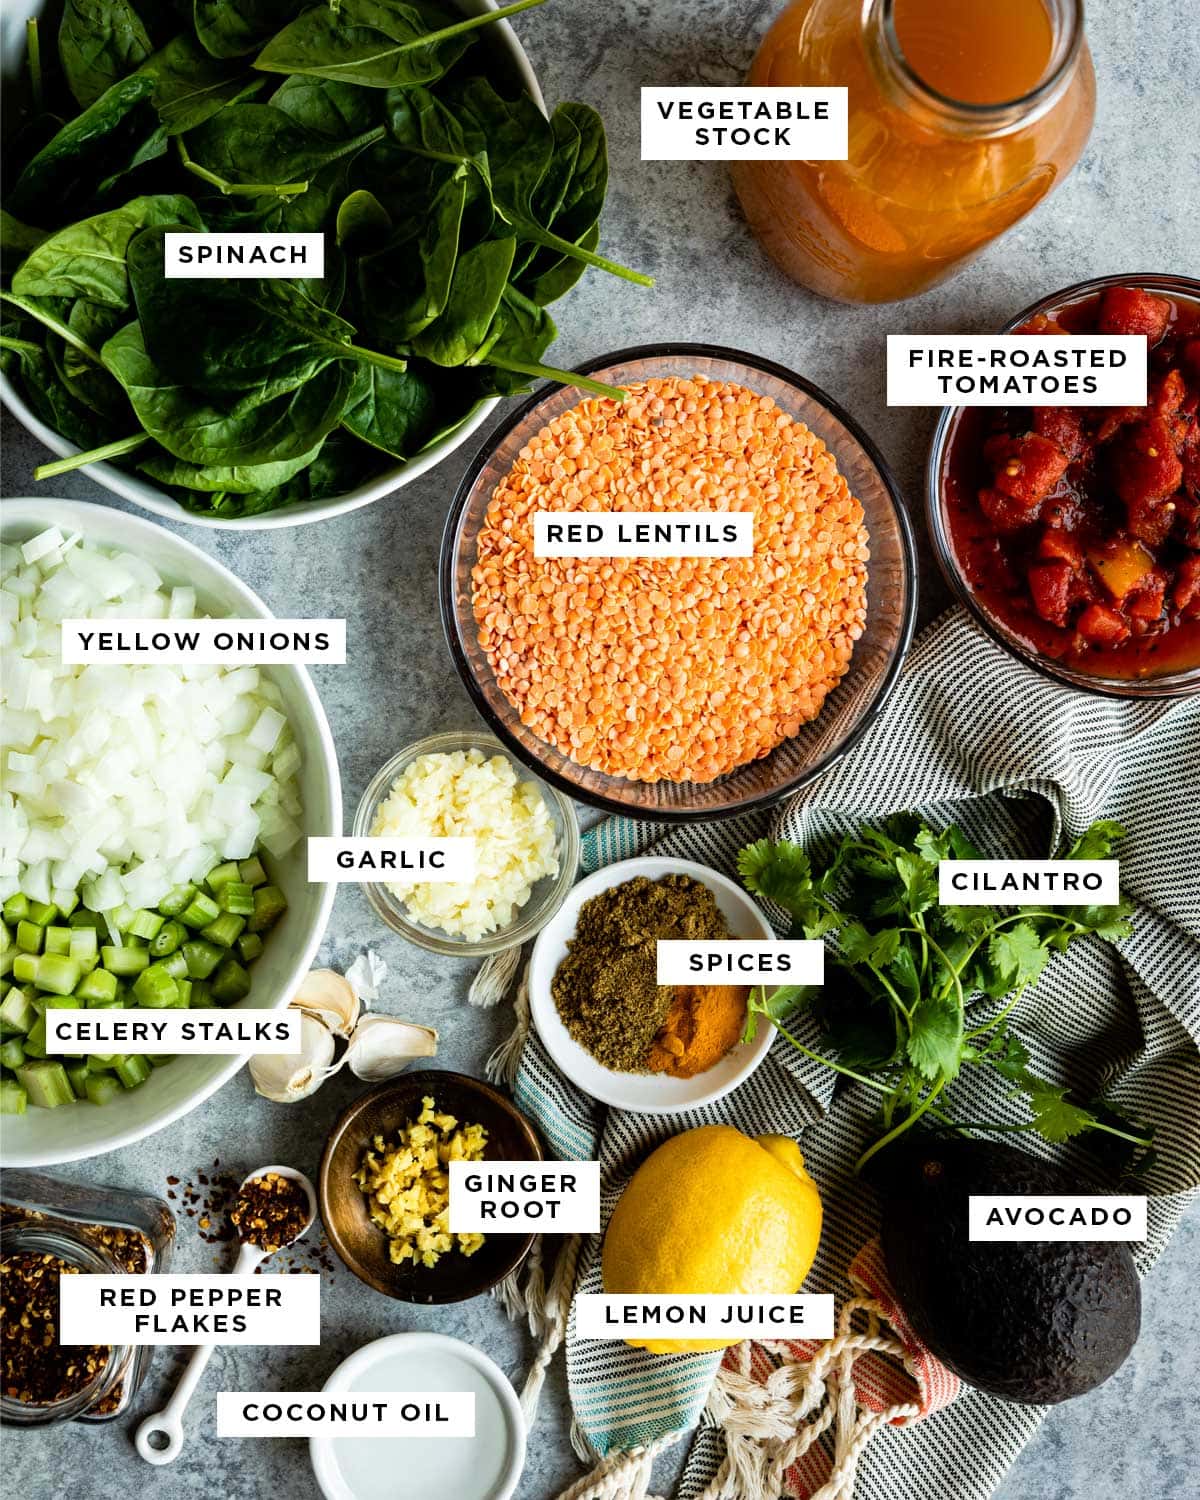 labeled ingredients for a hearty soup including vegetable stock, fire-roasted tomatoes, red lentils, cilantro, spices, lemon juice, avocado, ginger root, coconut oil, red pepper flakes, celery, garlic, yellow onions and spinach.